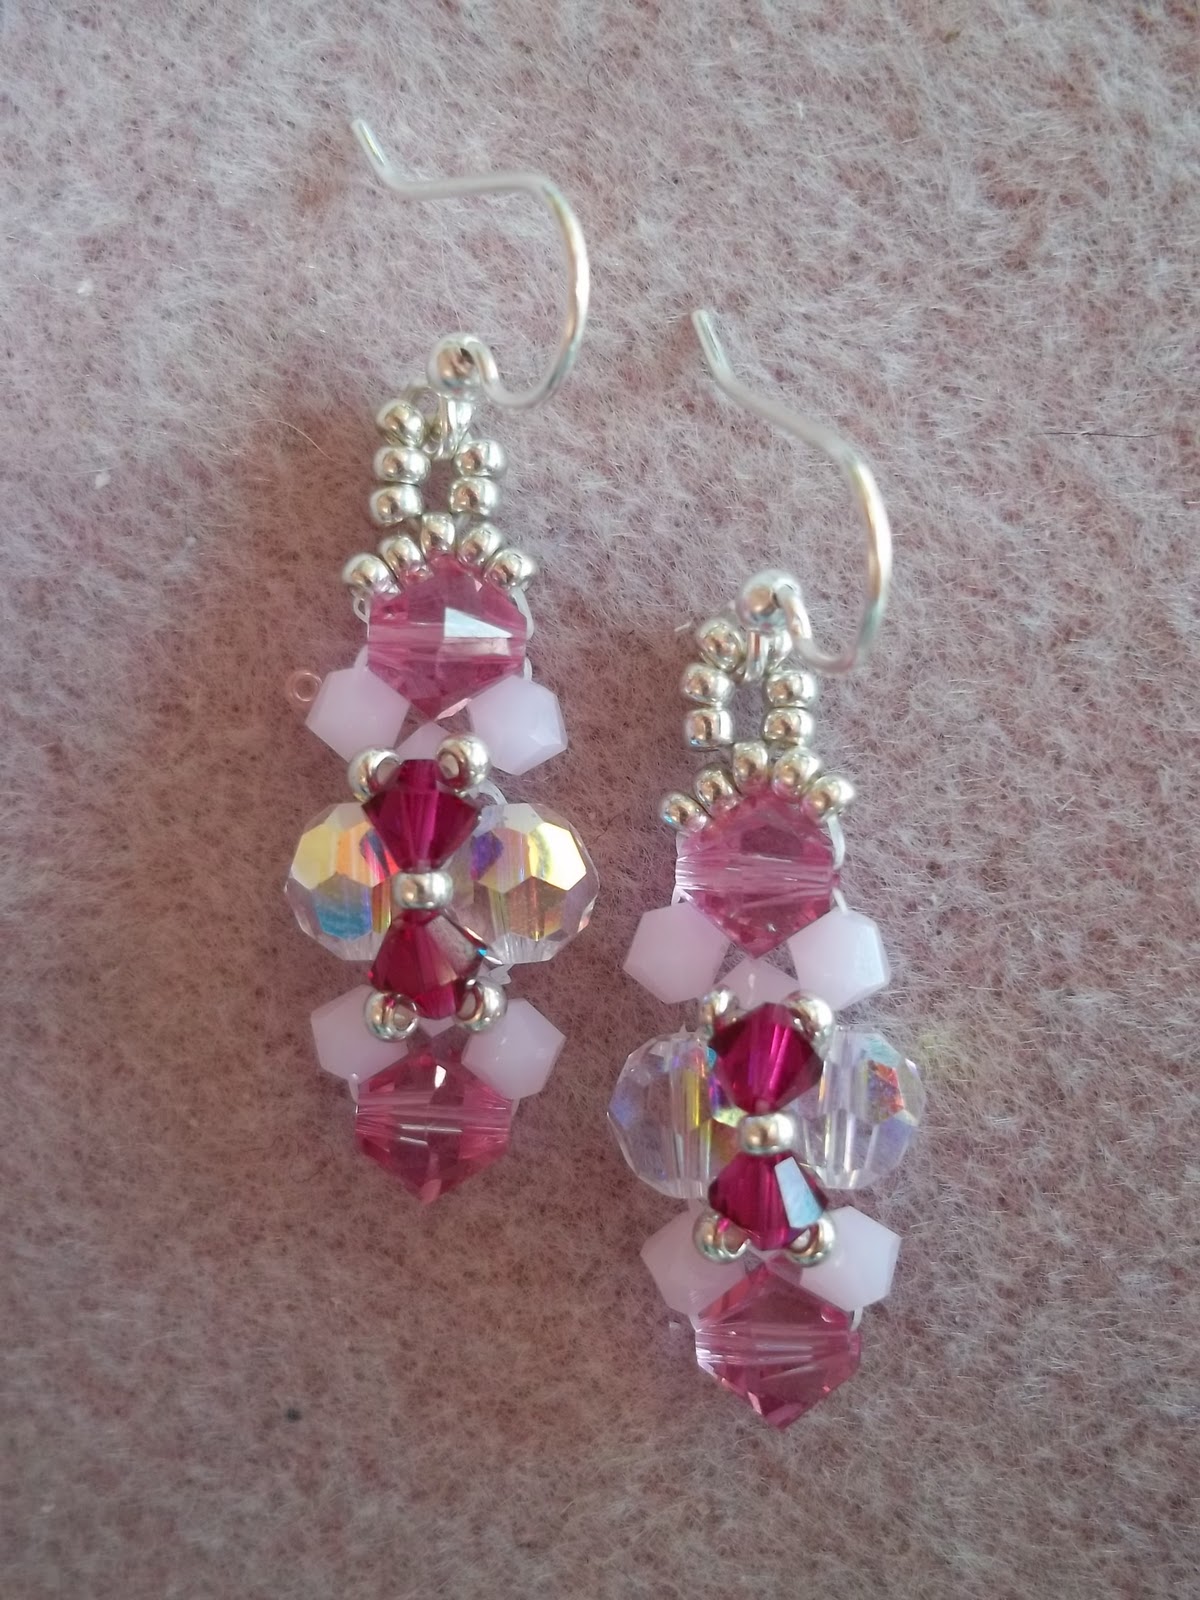 Off The Beaded Path: Day 6 Earring Challenge